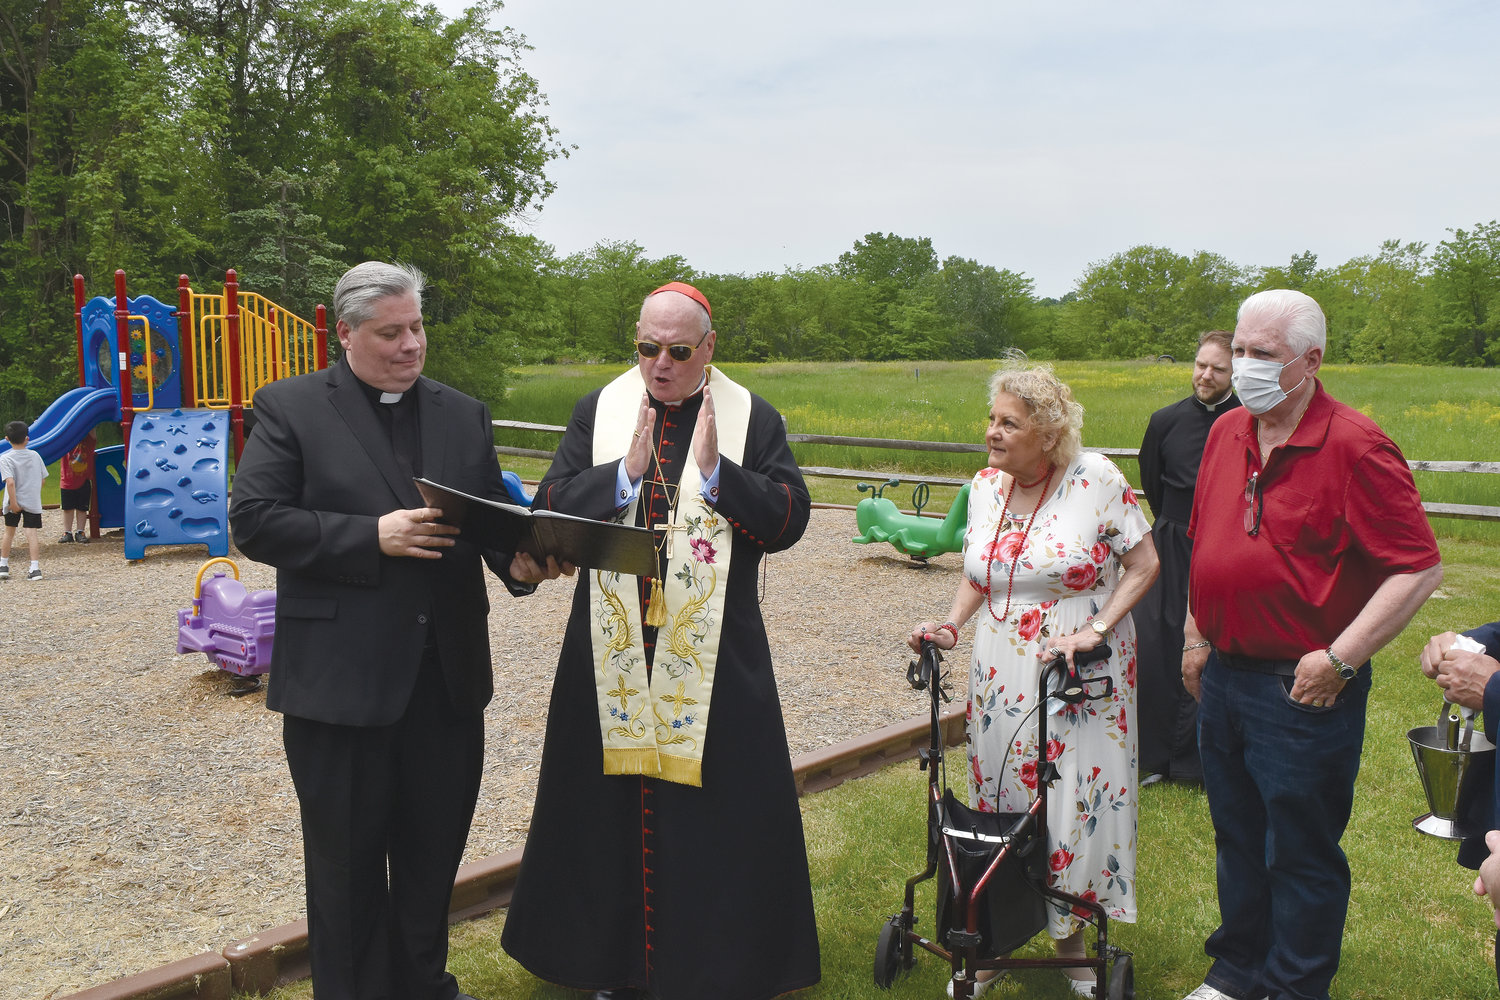 Cardinal Dolan blesses the playground for youngsters in the Faith First Early Childhood Program at St. Columba’s parish in Chester May 22. At far left is Father John Bonnici, pastor of St. Columba’s. At far back is Father Stephen Ries, the cardinal’s priest secretary.